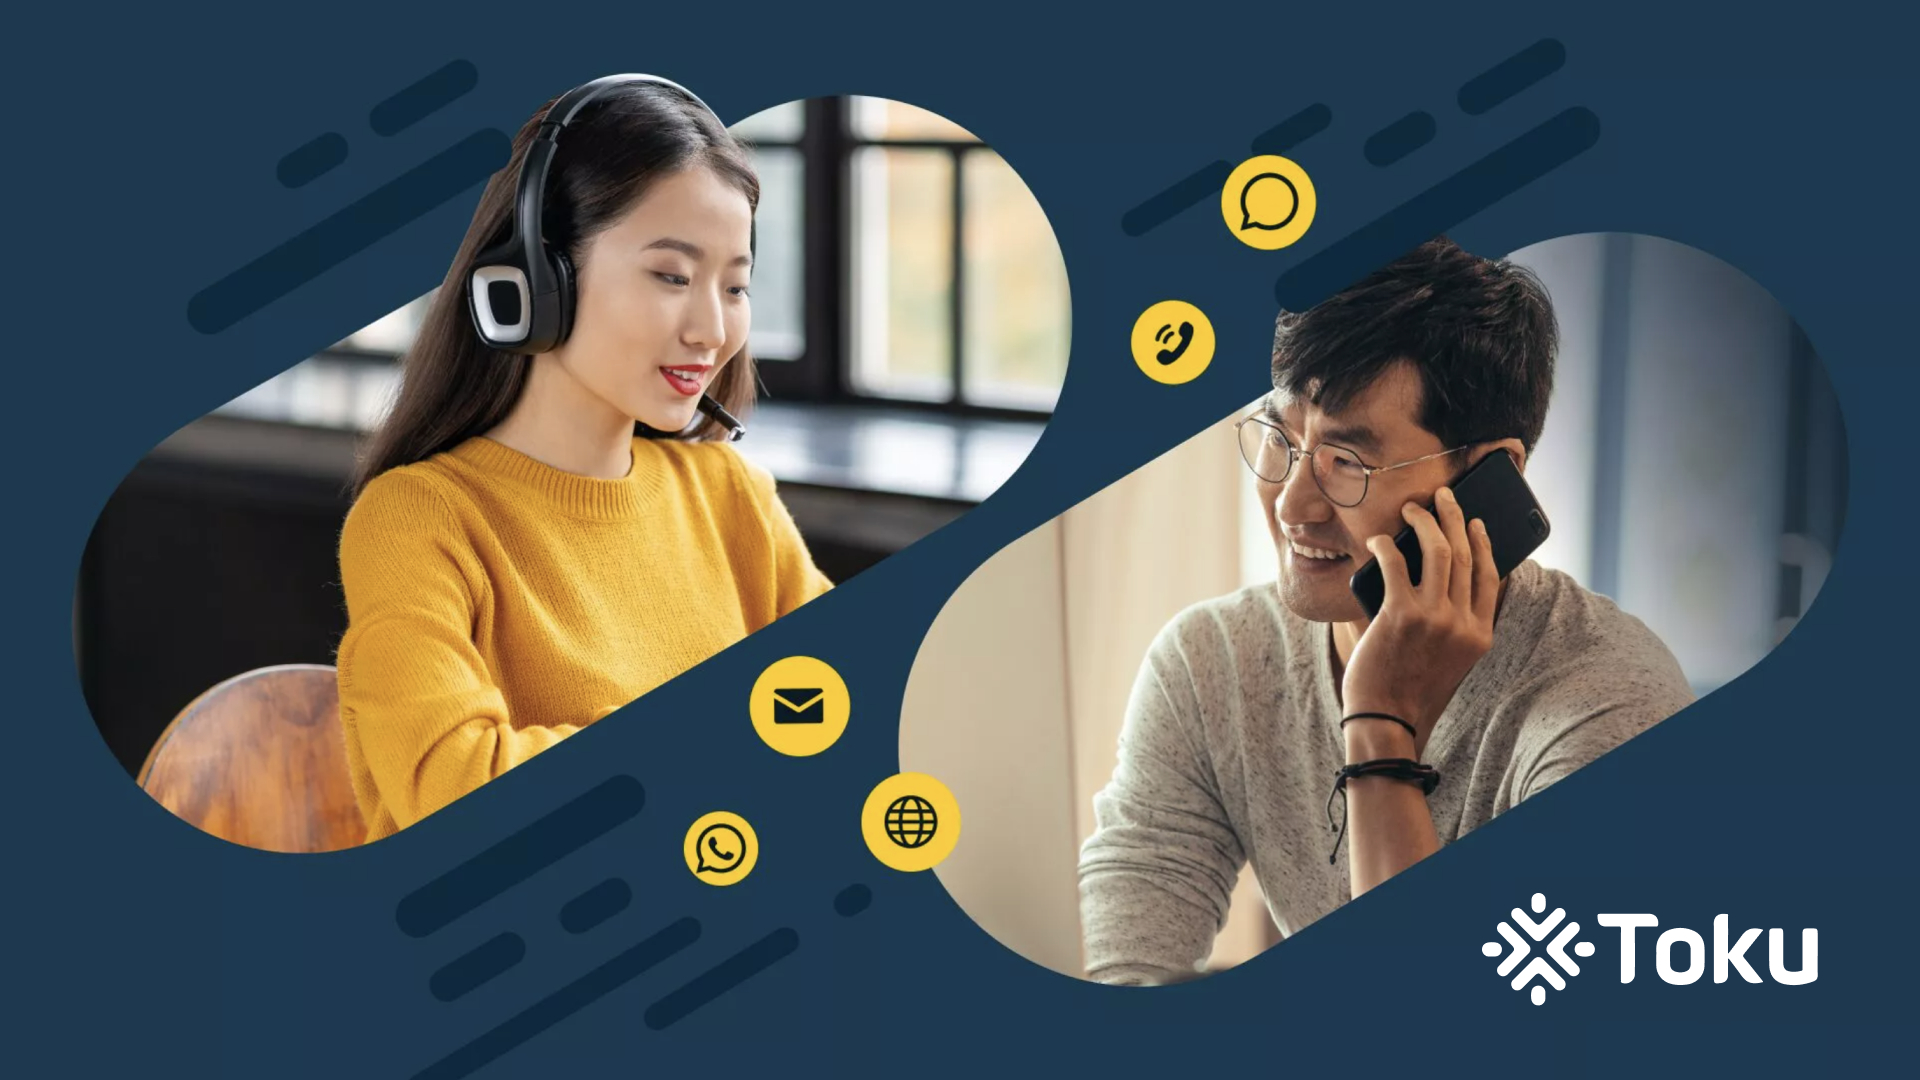 Toku Launches a Contact Centre Platform to Deliver Better Omnichannel Customer Experiences for Businesses Operating in APAC